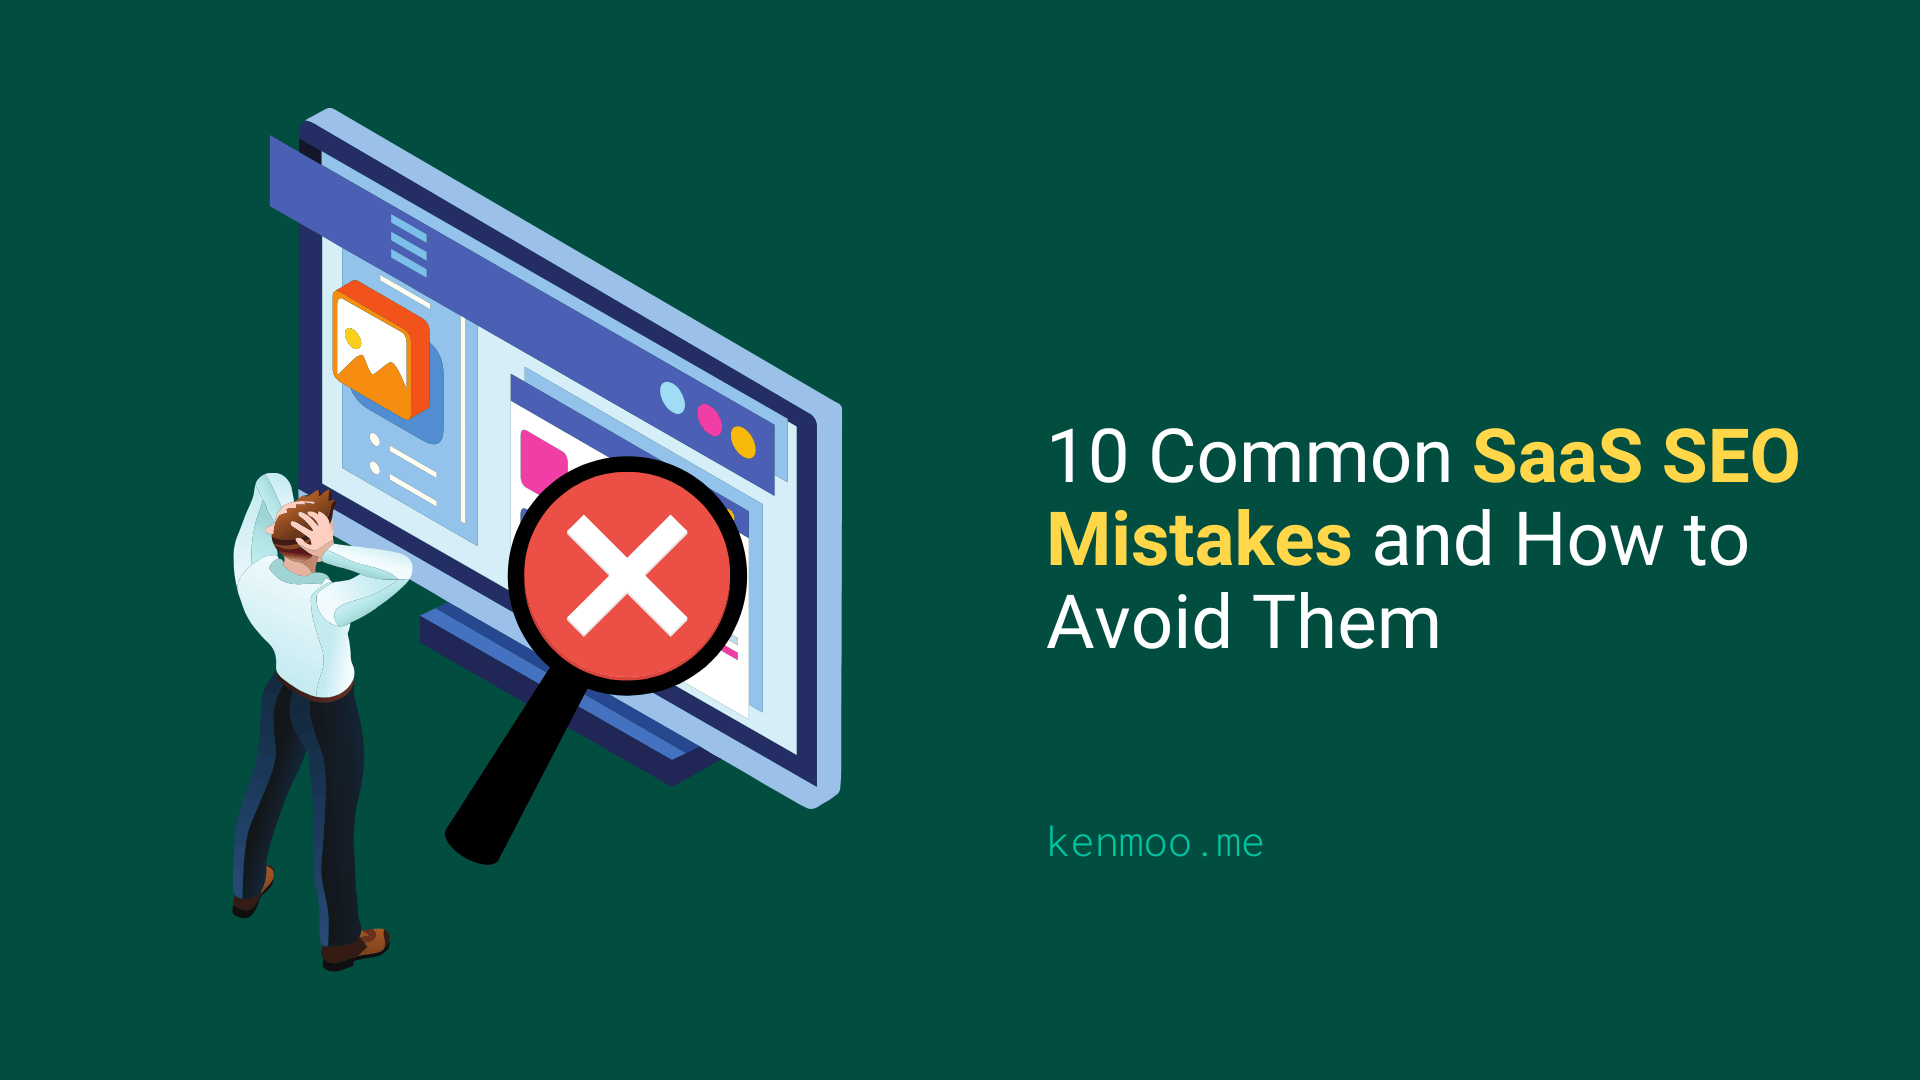 10 Common SaaS SEO Mistakes and How to Avoid Them